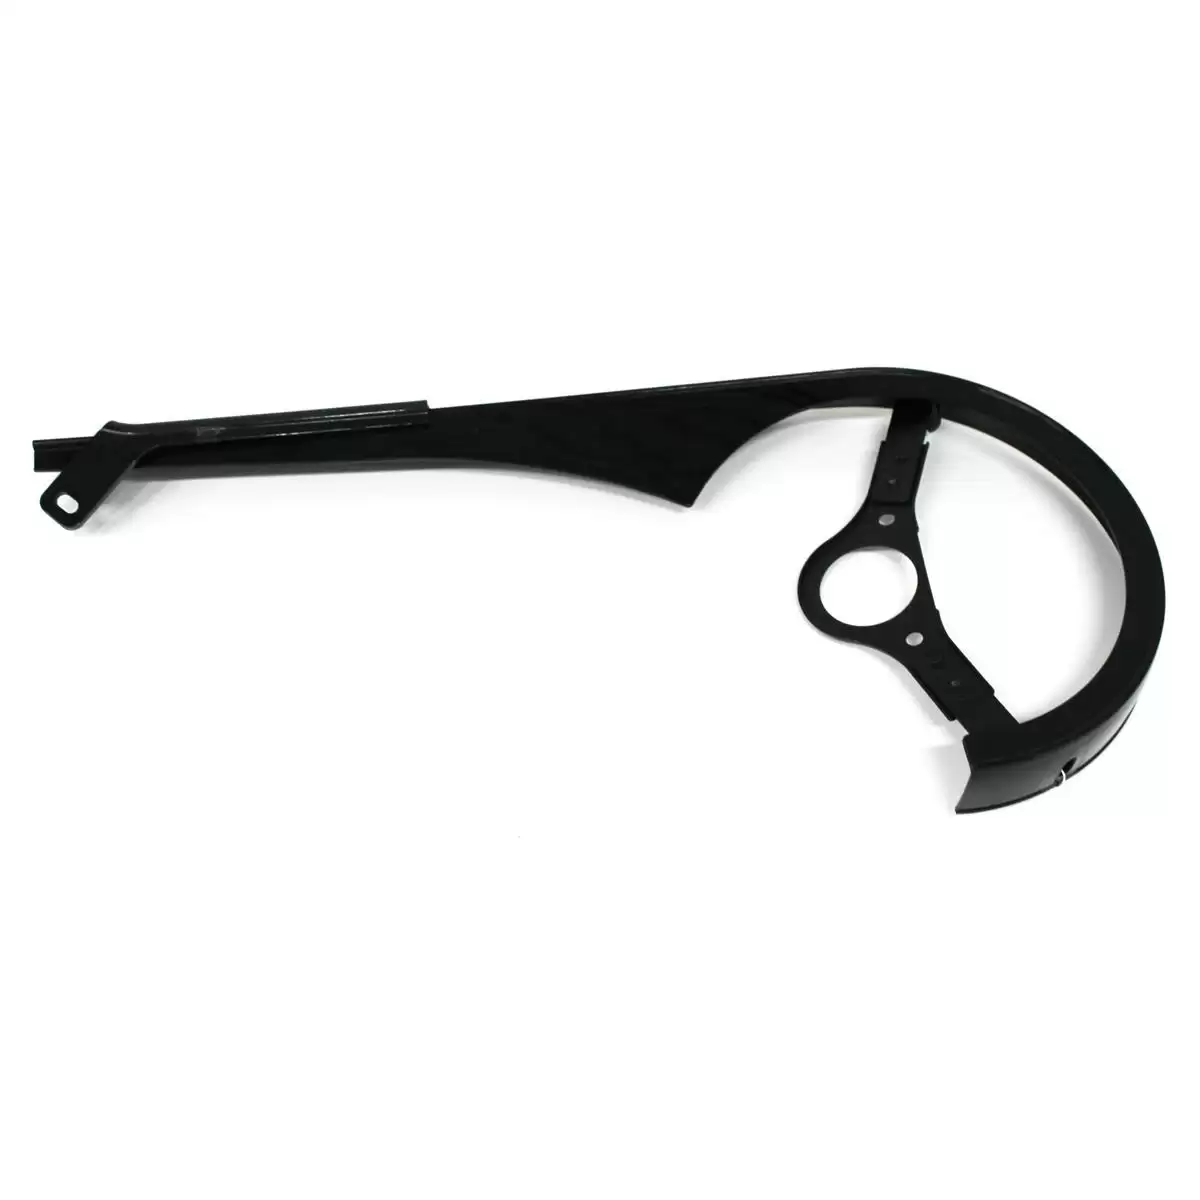 Carter CG-16 for chainrings up to 38-40t adjustable 430mm - image